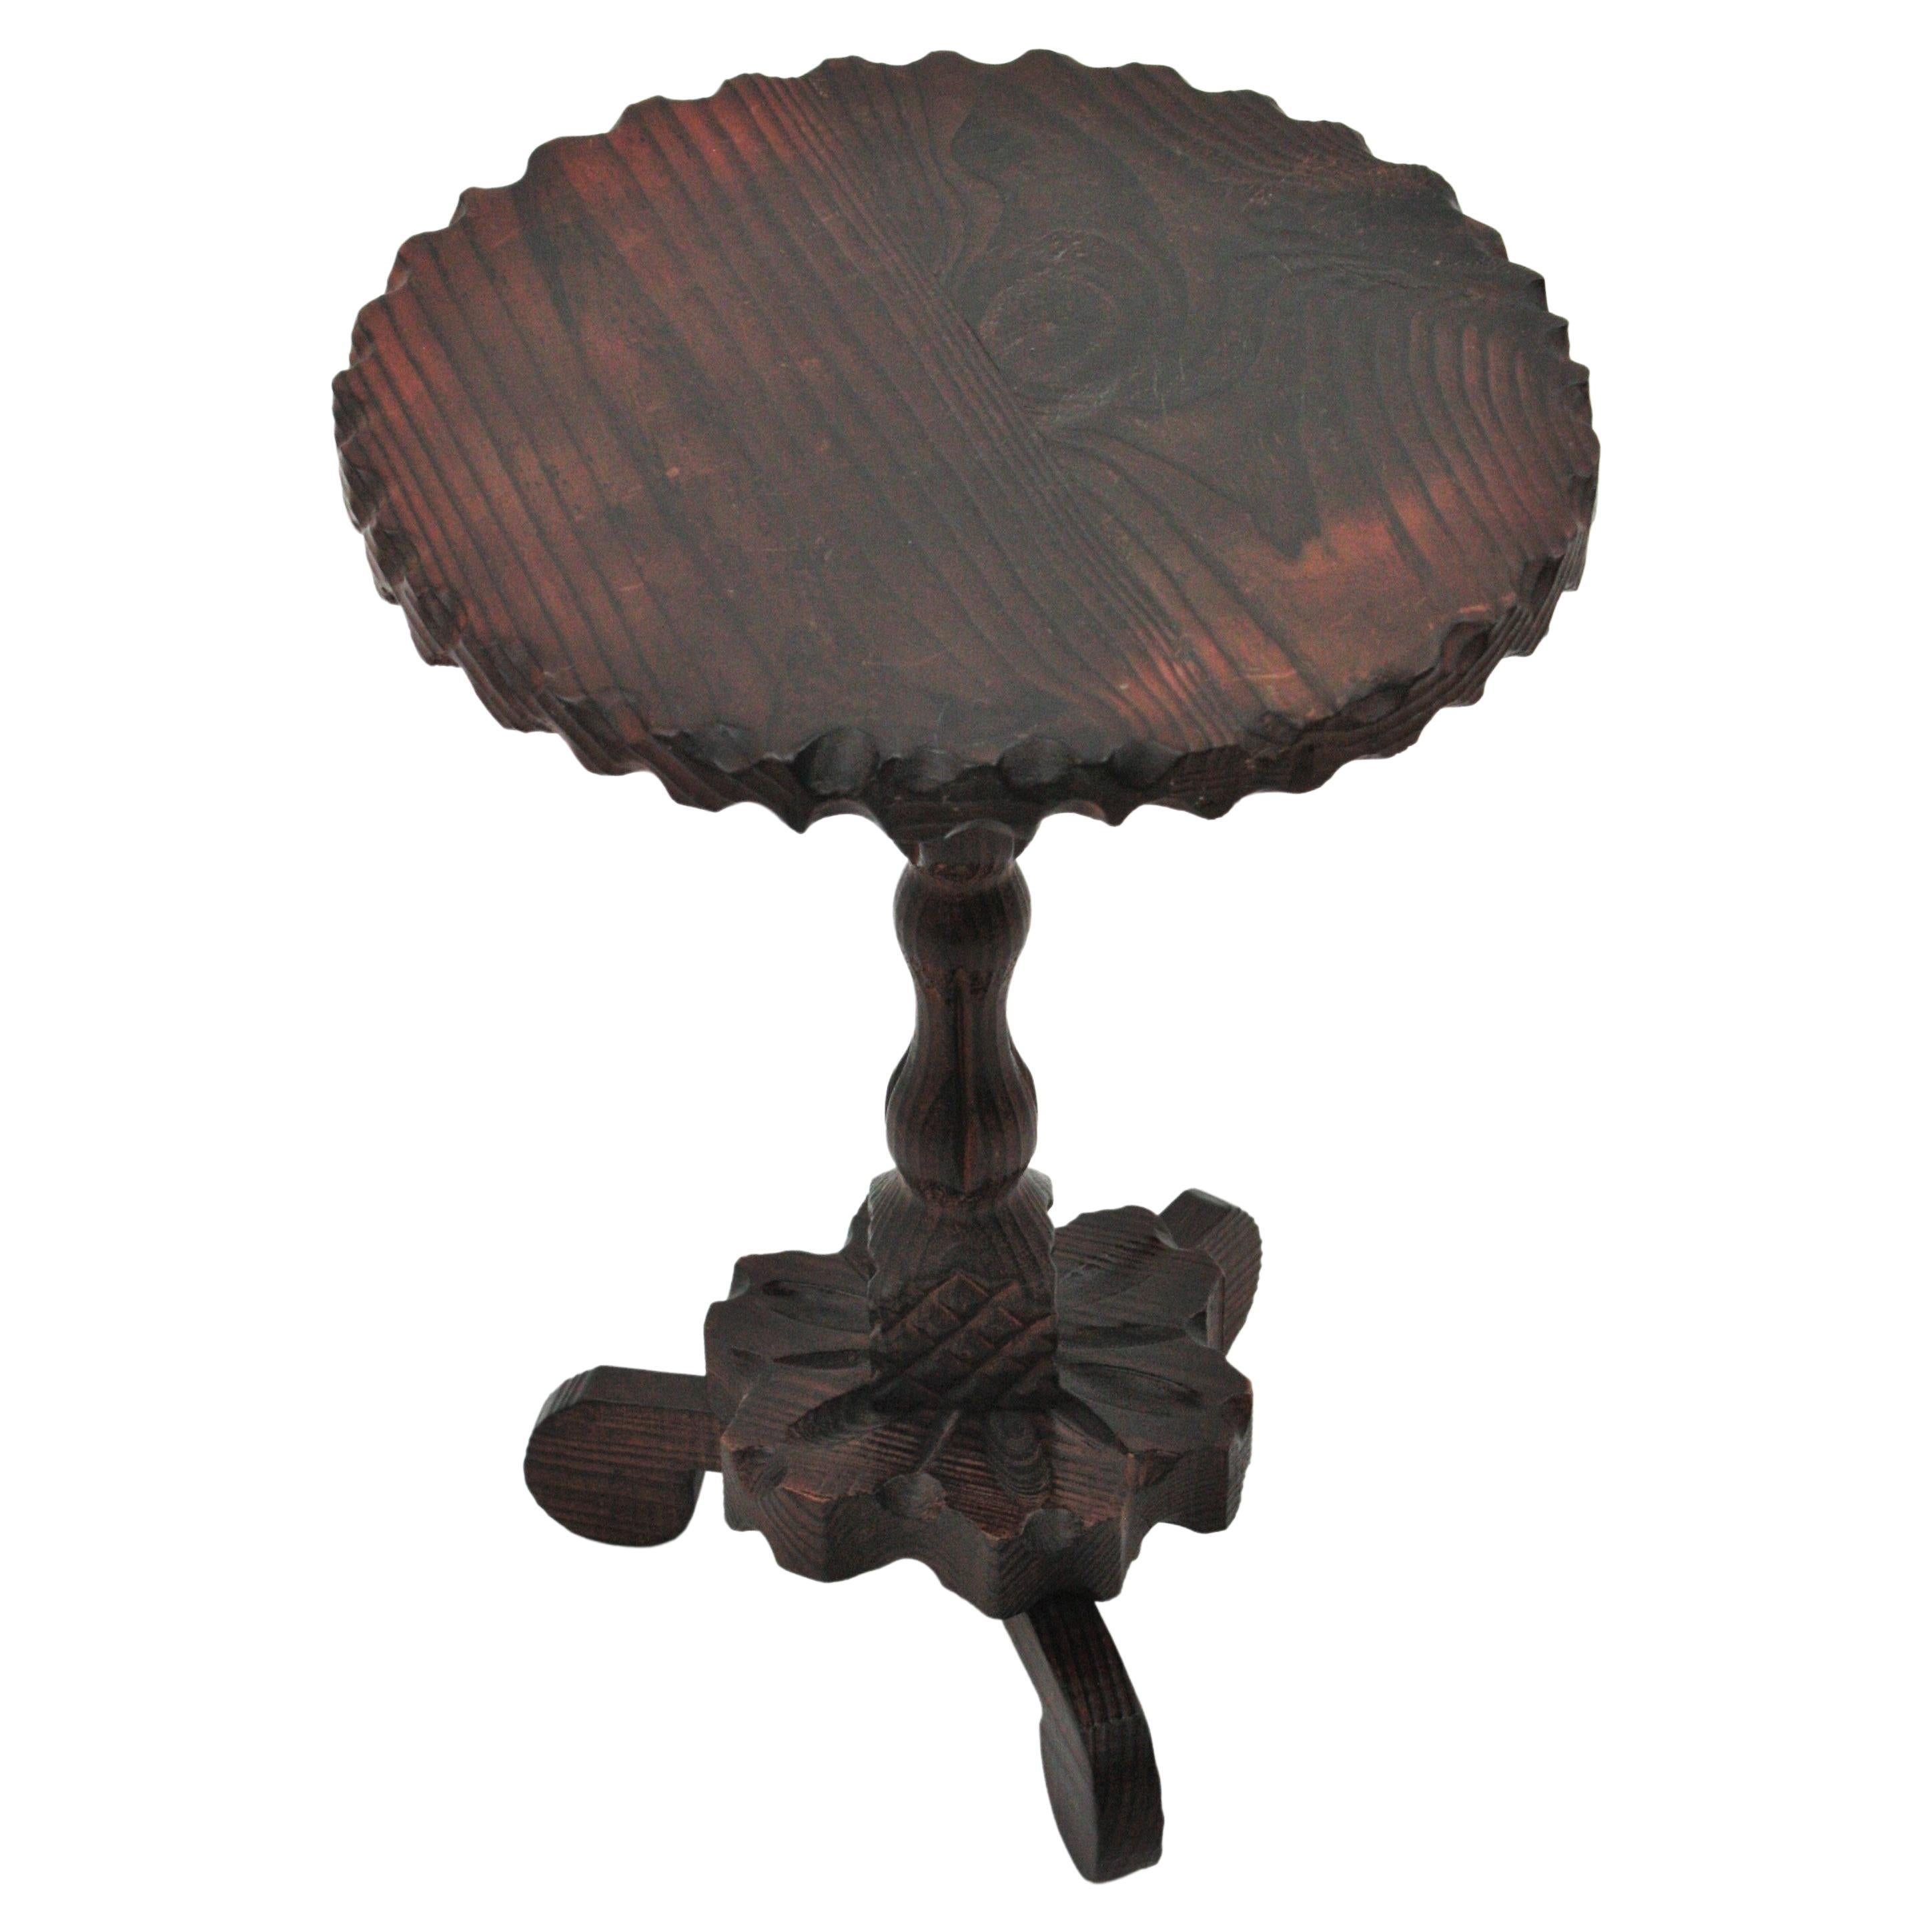 hand carved pine wood gueridon table or occassional table standing on tripod base. Spain, 1940s.
The tabletop in round shape has scalloped details on the edge. It is supported on a turned wood stem on a flower shaped carved base with three wooden